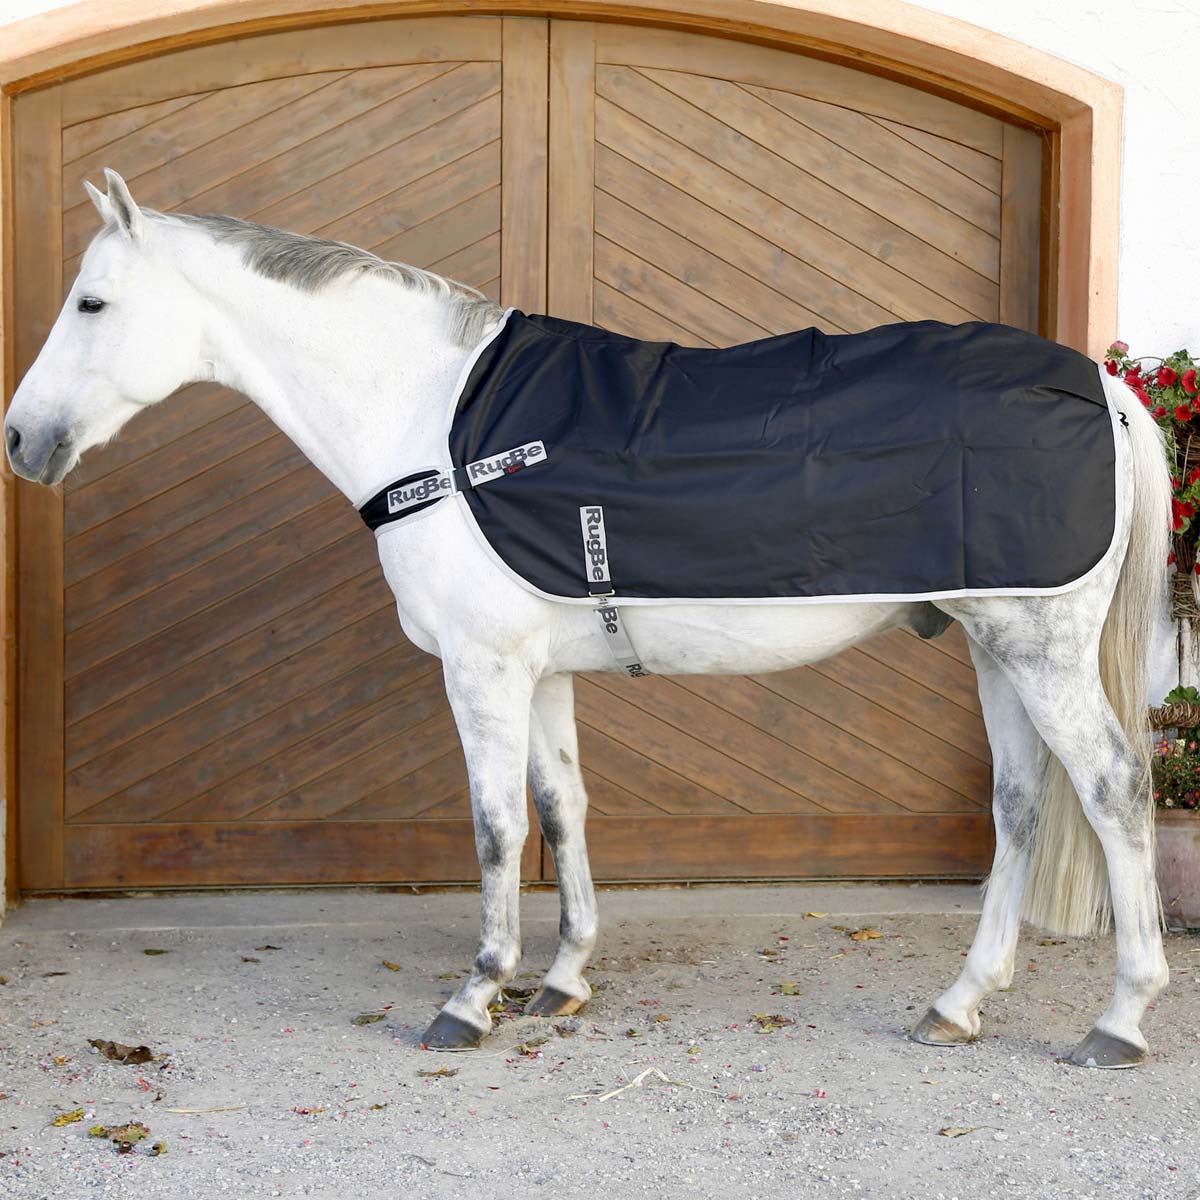 Covalliero RugBe Exercise Rug 600D 115